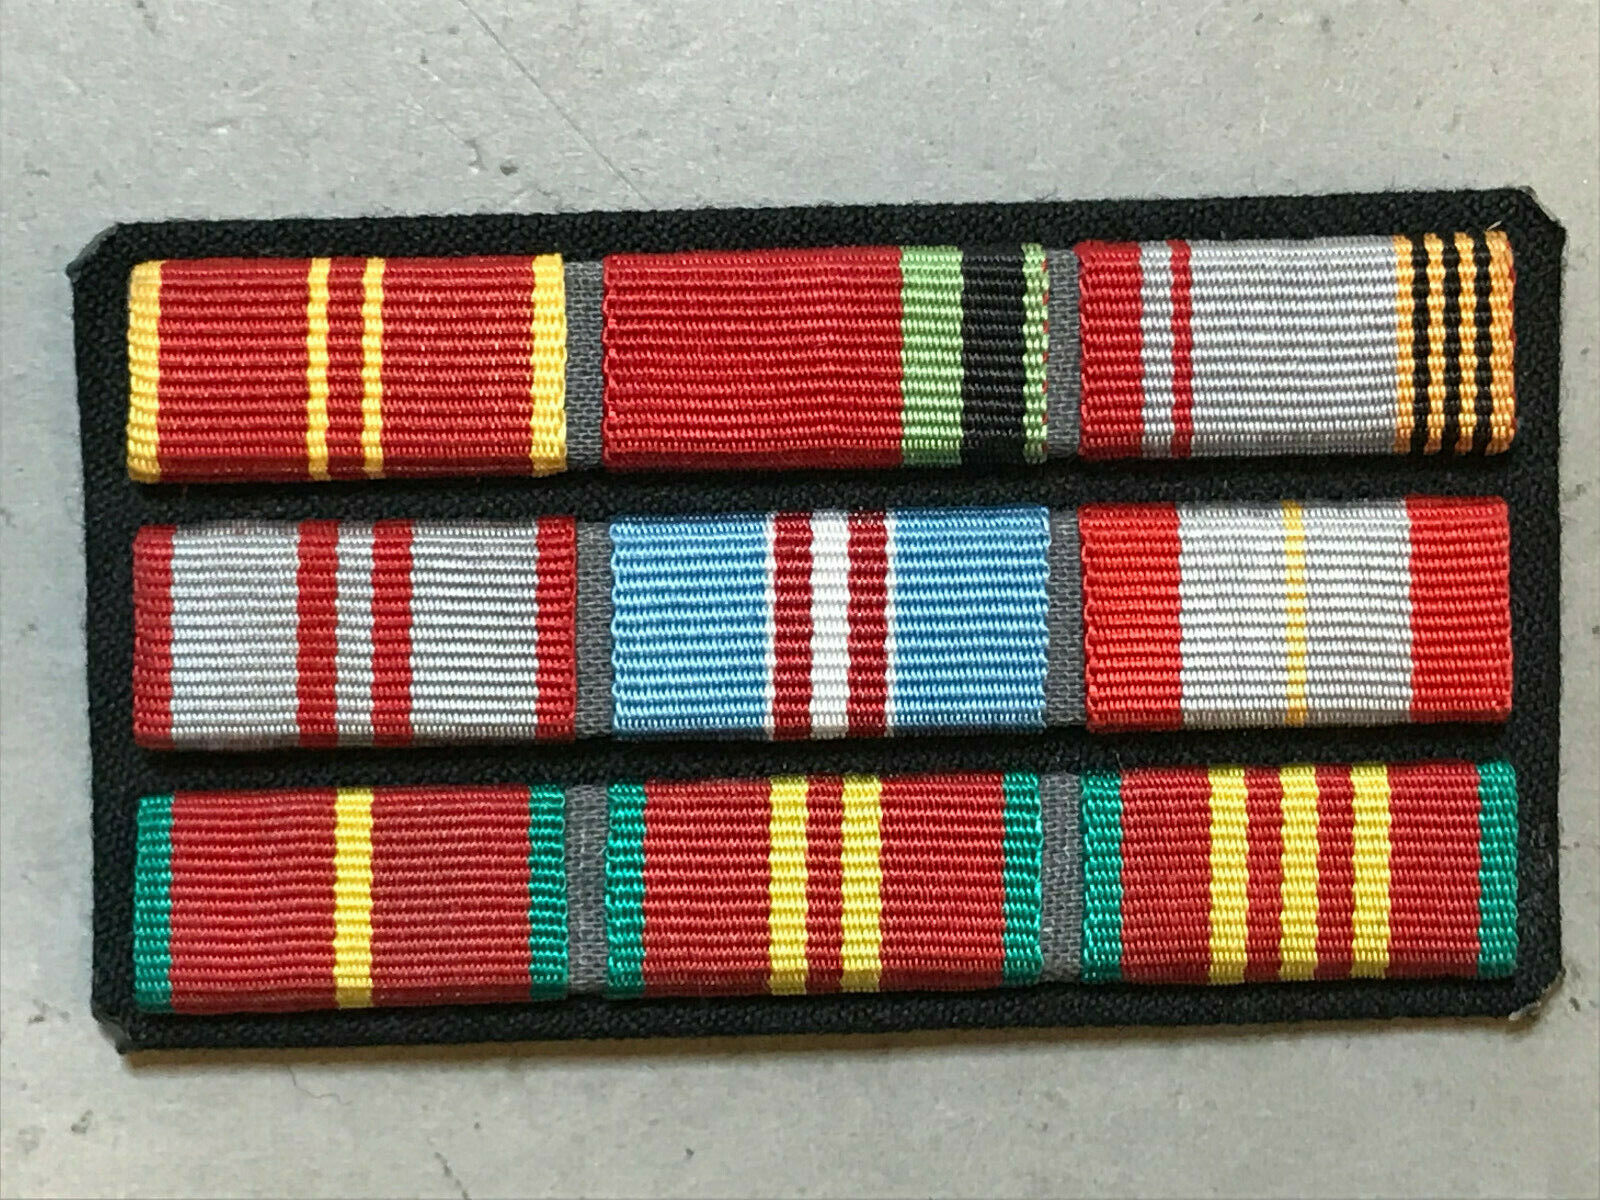 RIBBONS FOR RUSSIAN ORDERS MEDALS WW II